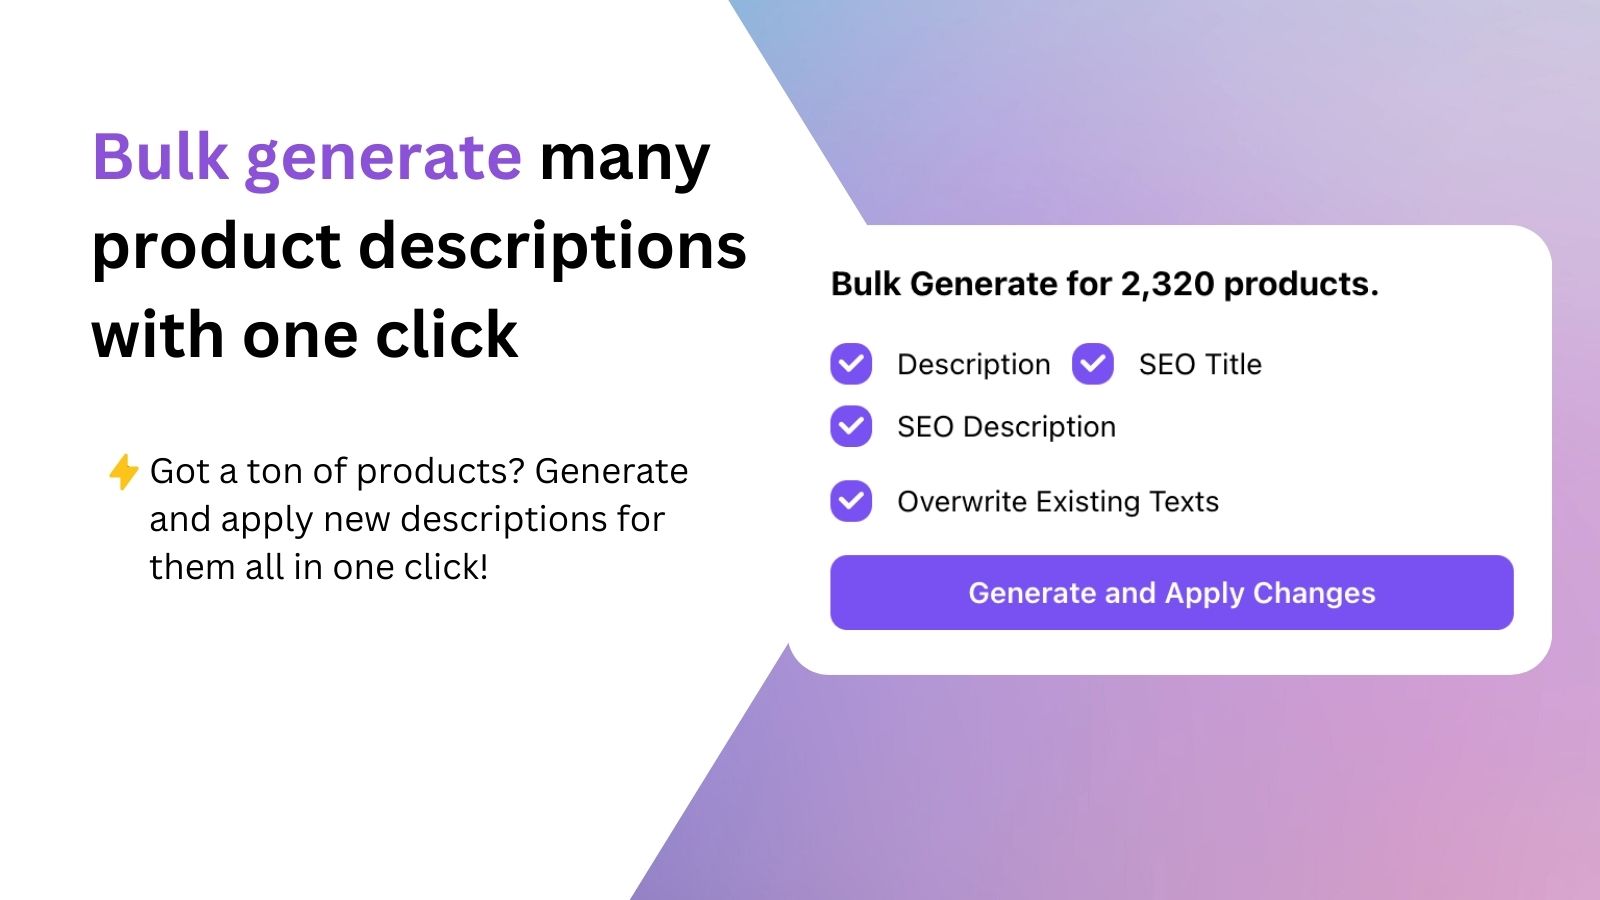 Bulk generate many product descriptions with one click